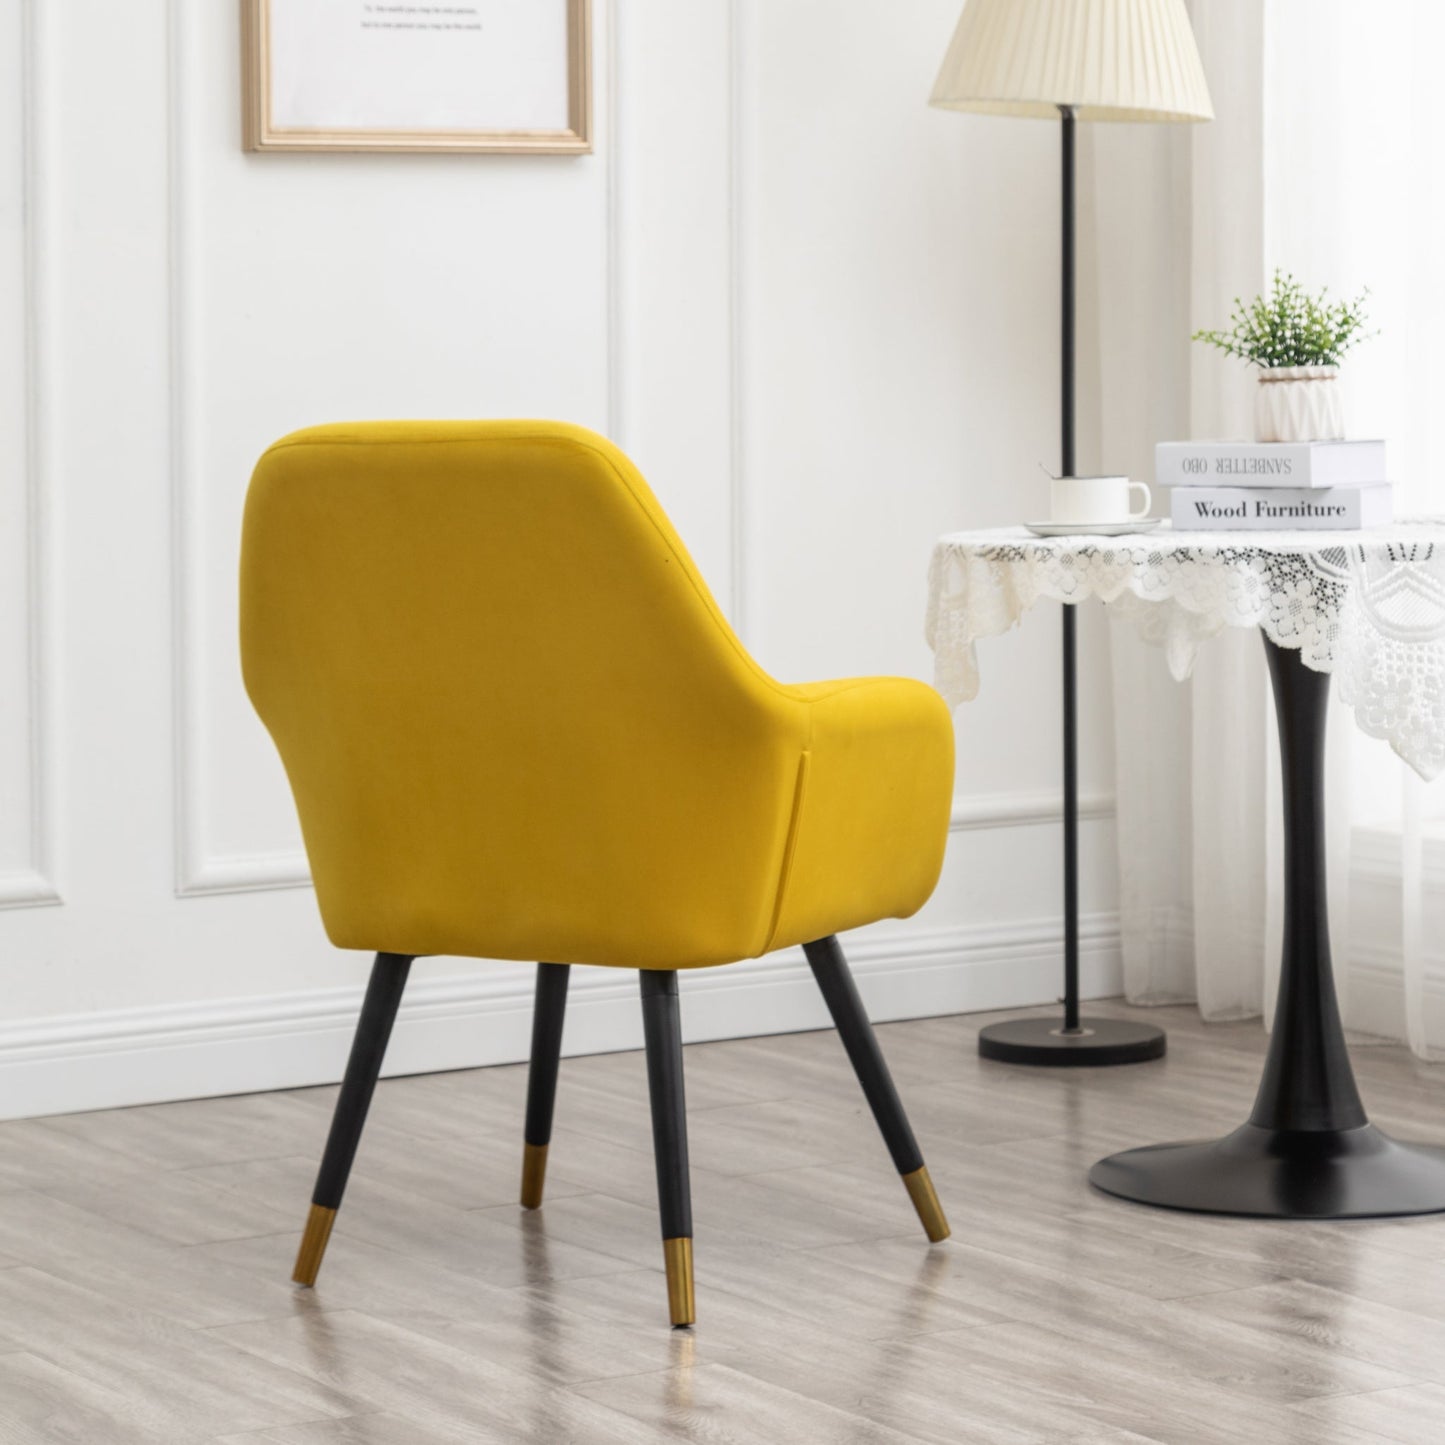 Tuchico Contemporary Velvet Upholstered Accent Chair, Yellow